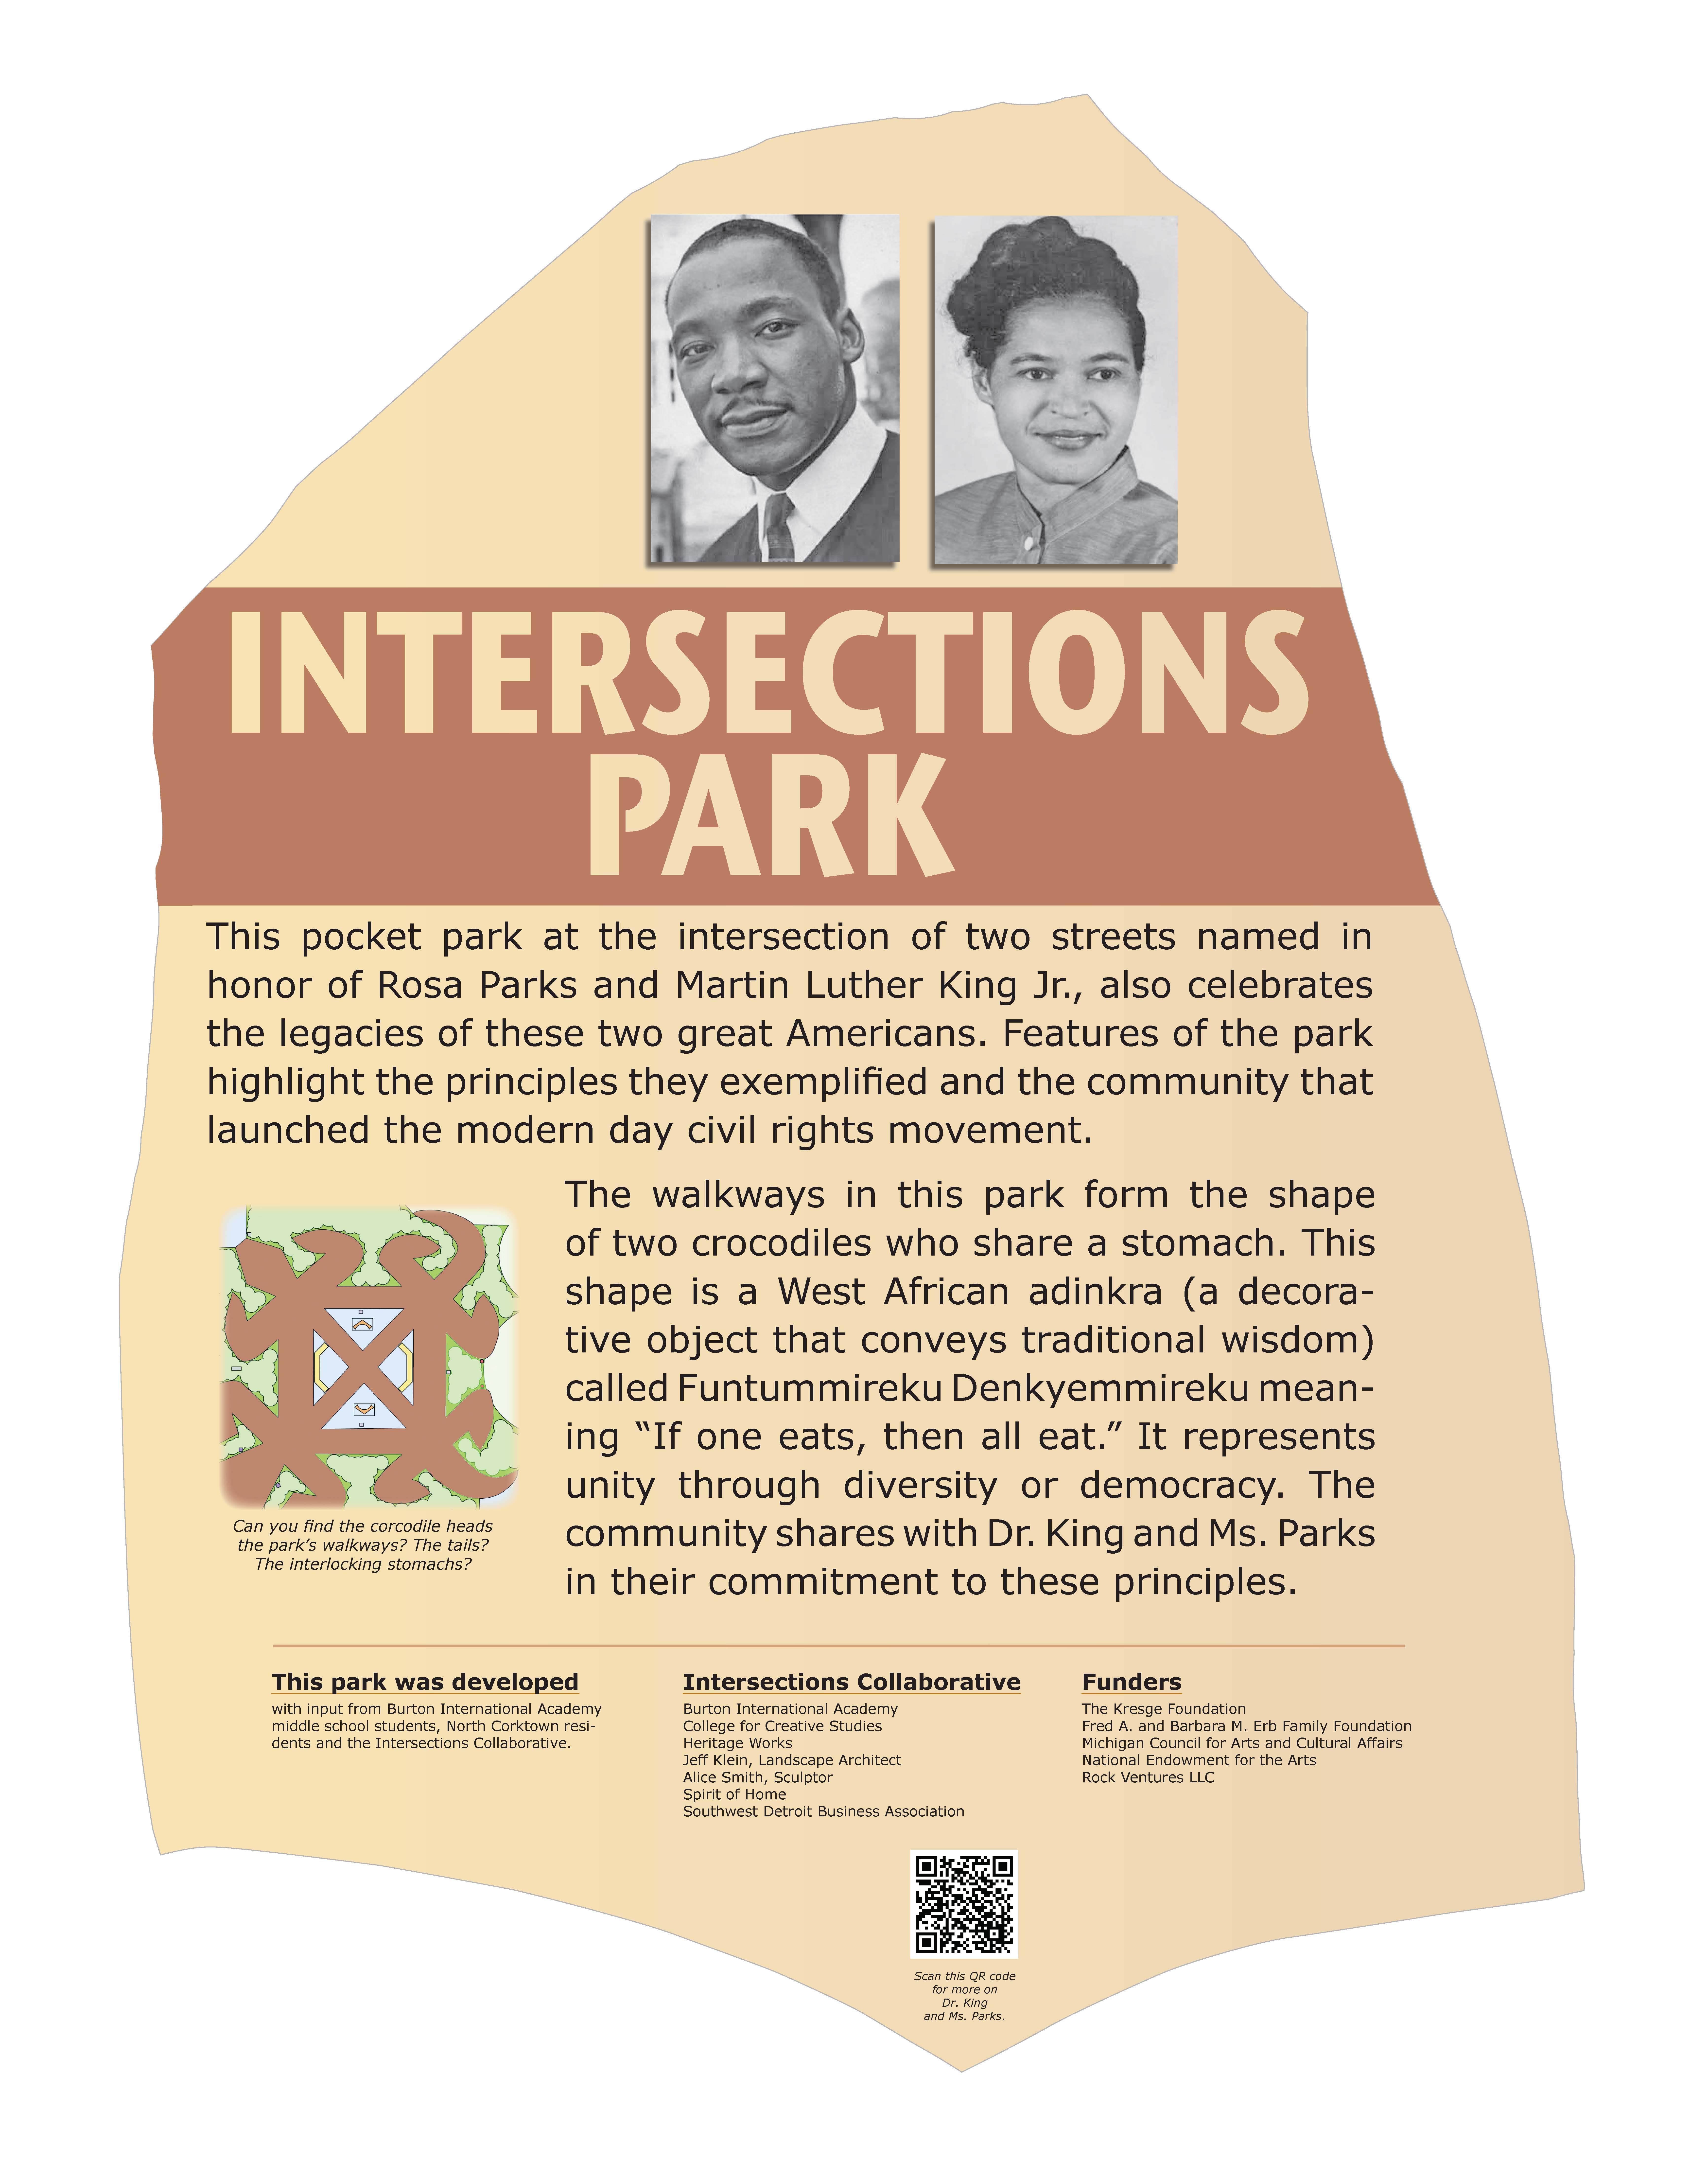 Video Overview: Intersections Park